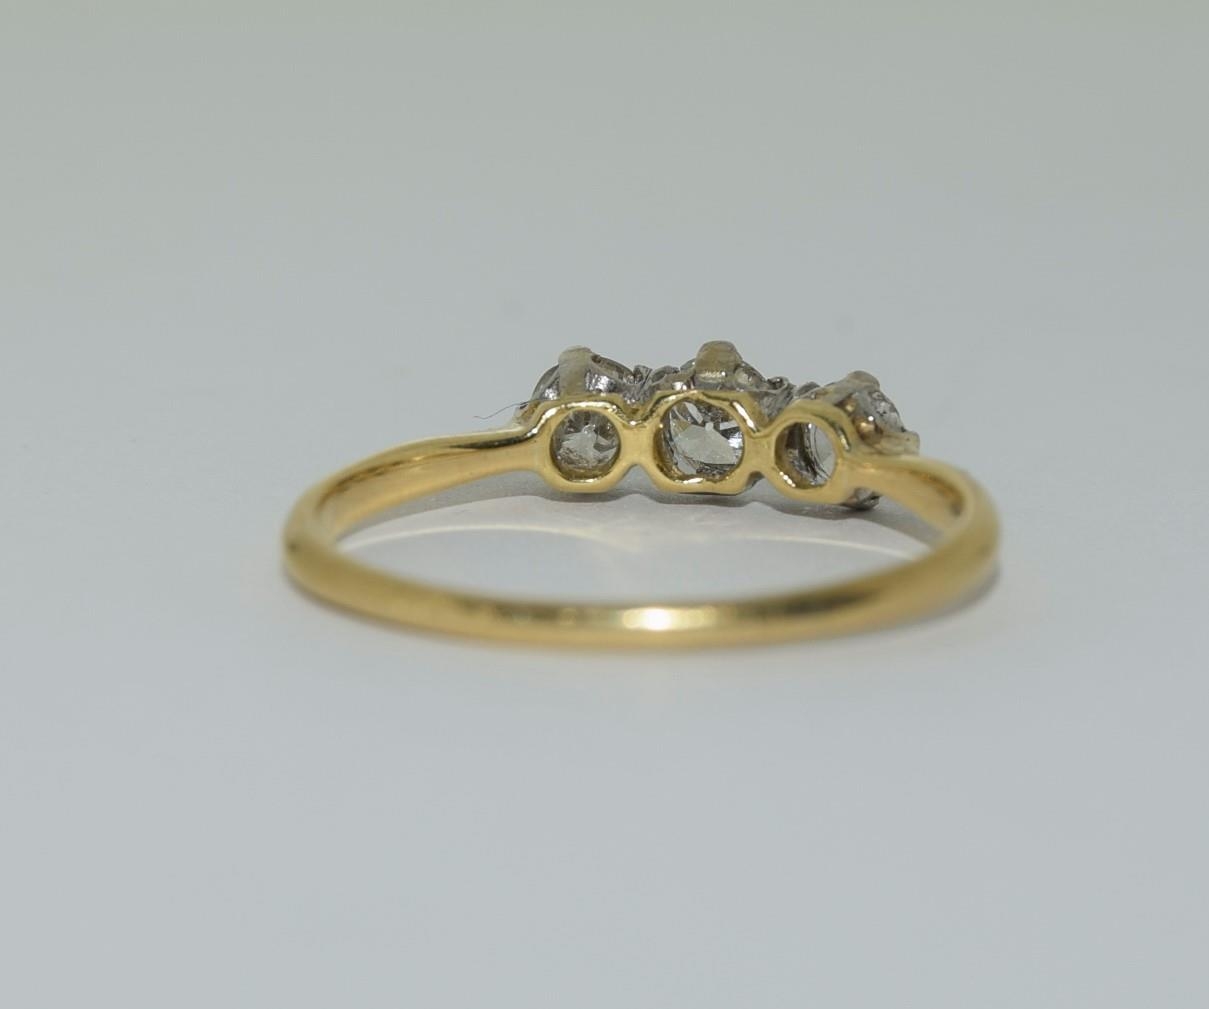 18ct gold and platinum ladies 3 stone diamond ring approx 0.33ct size M - Image 3 of 6